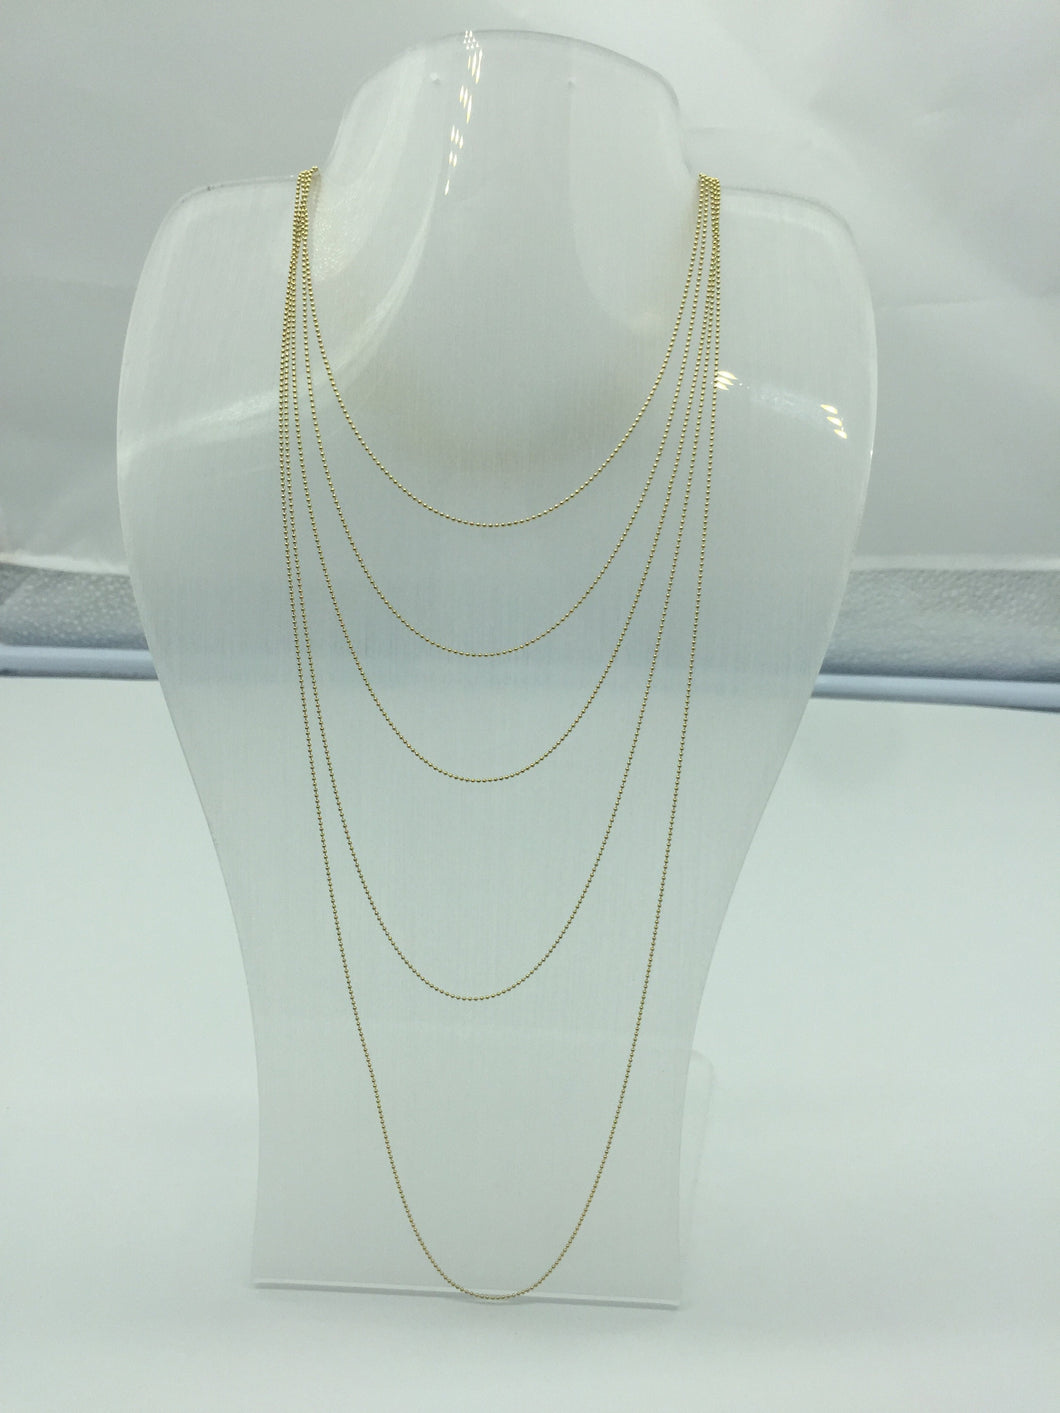 Gold filled chain,sterling silver chain,925 silver chain,sterling chain,boll chain,gold filled boll chain